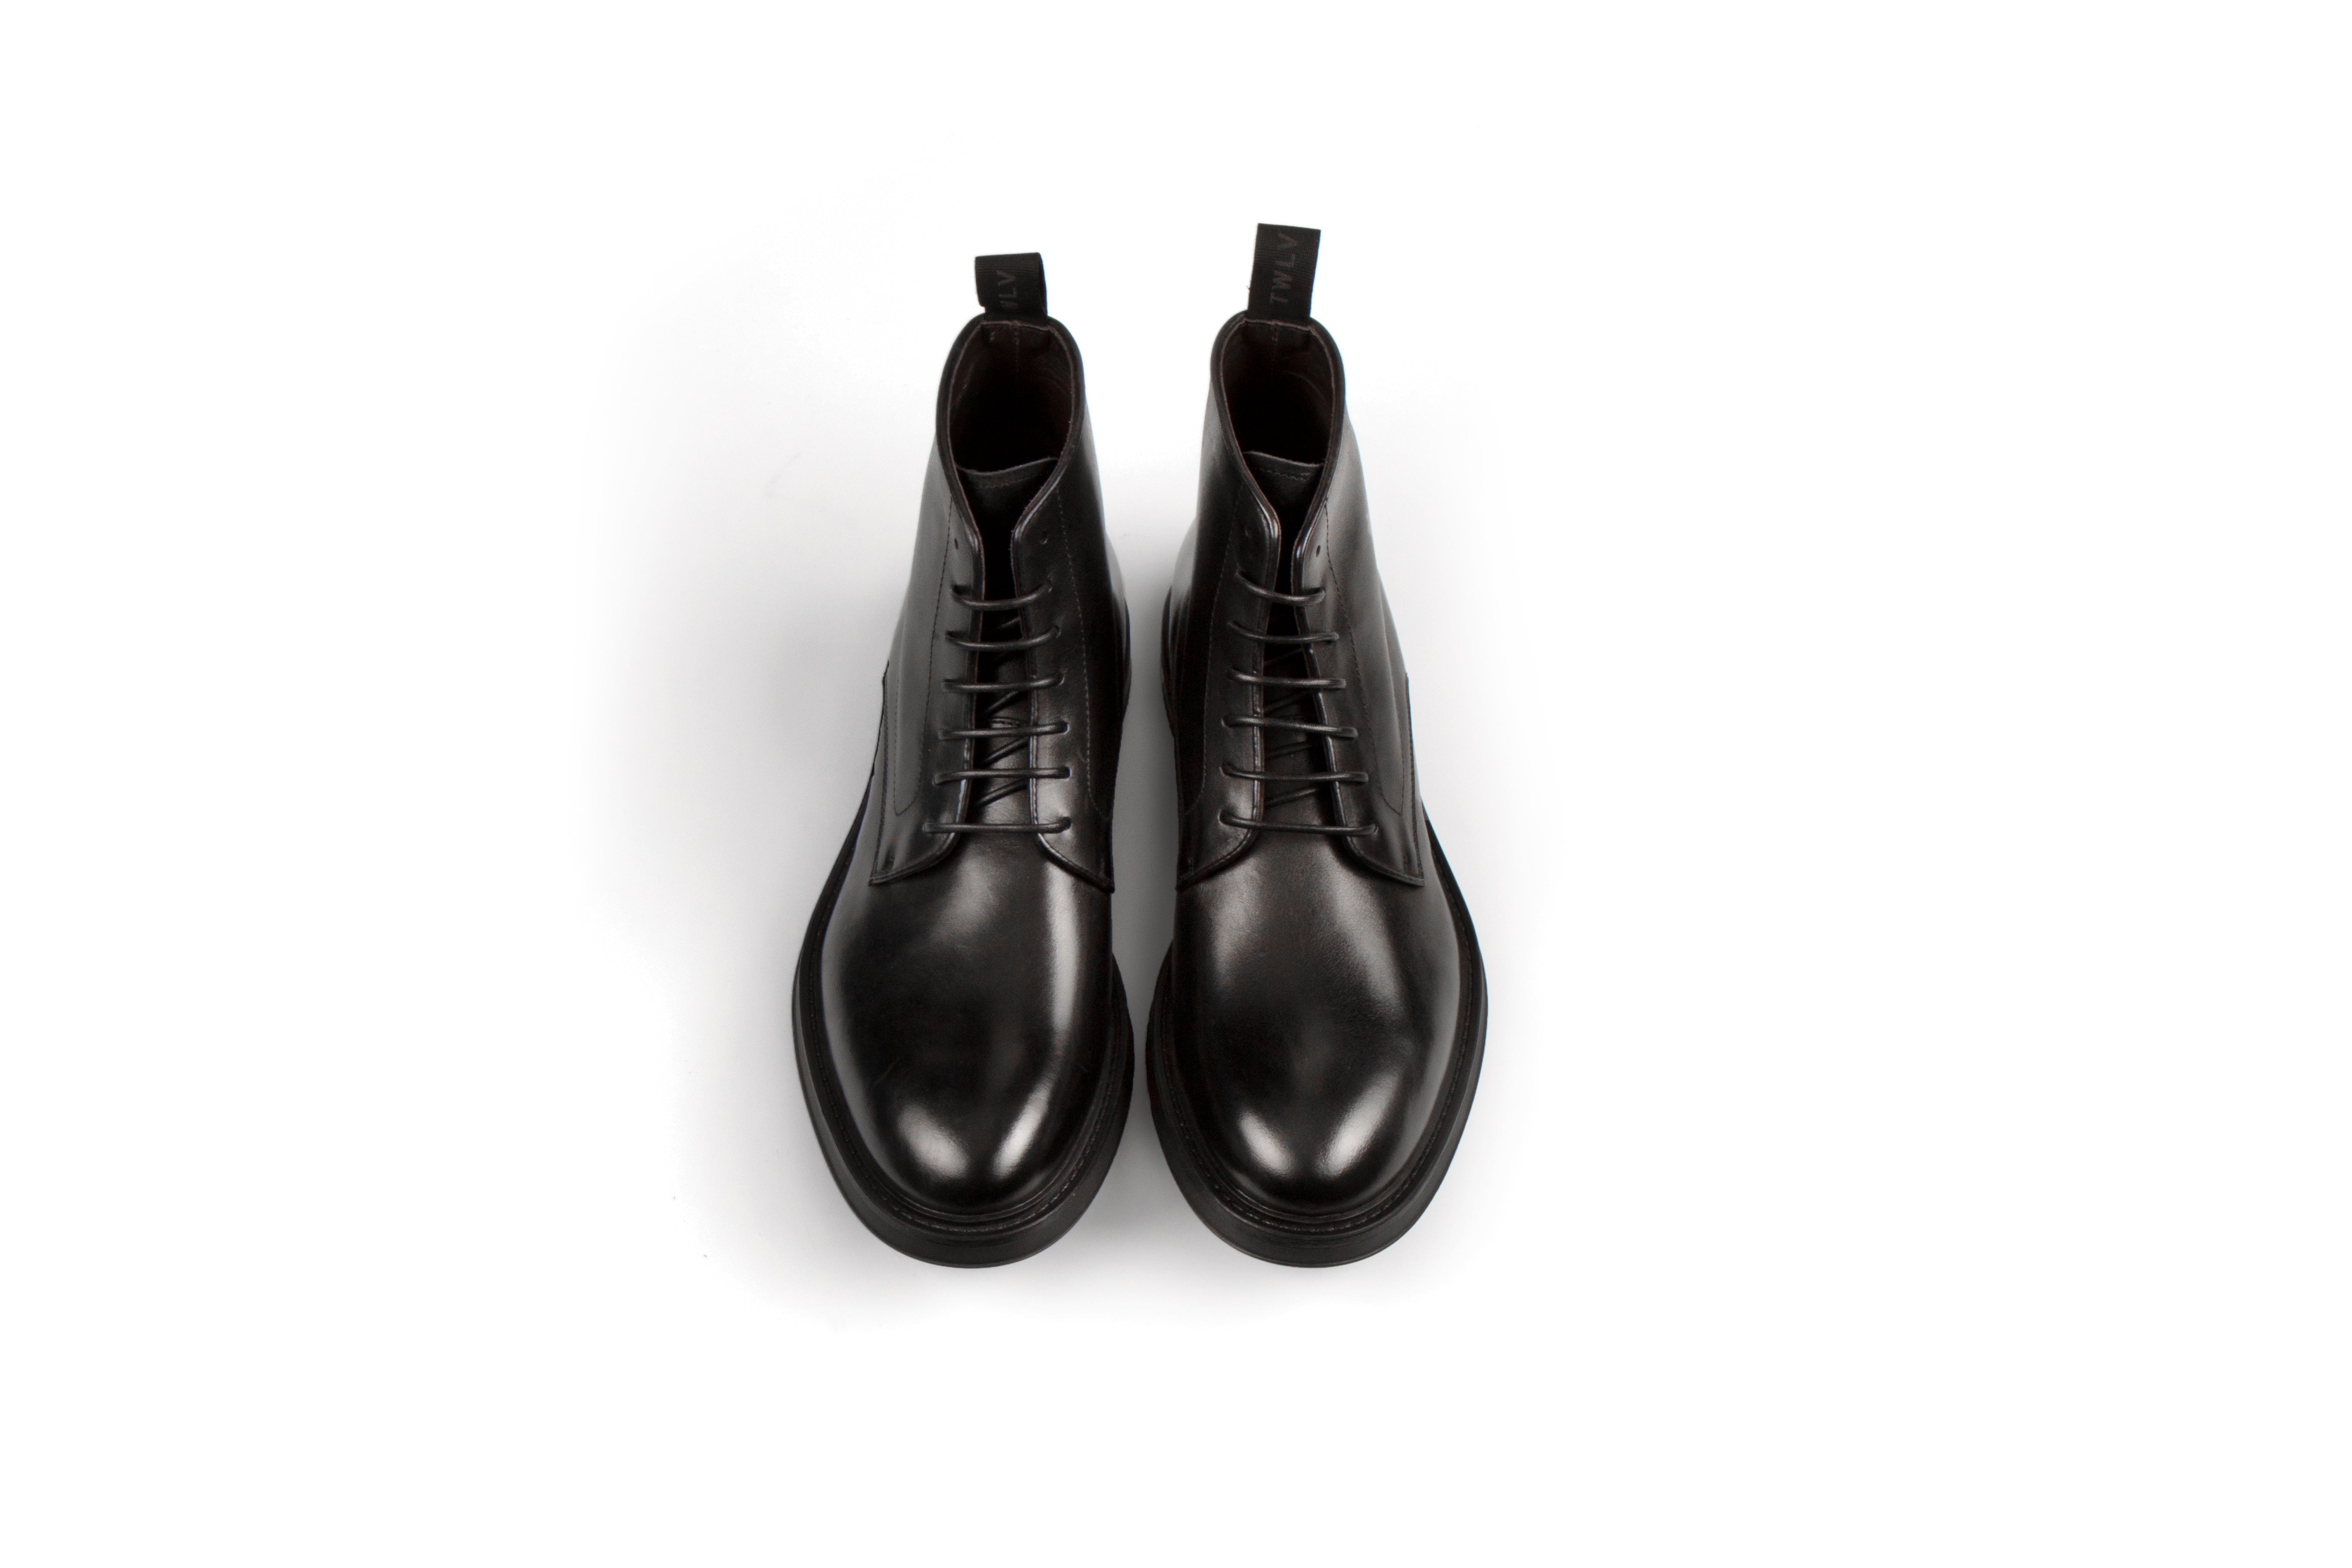 Link Black Calf Leather Balmoral Boots